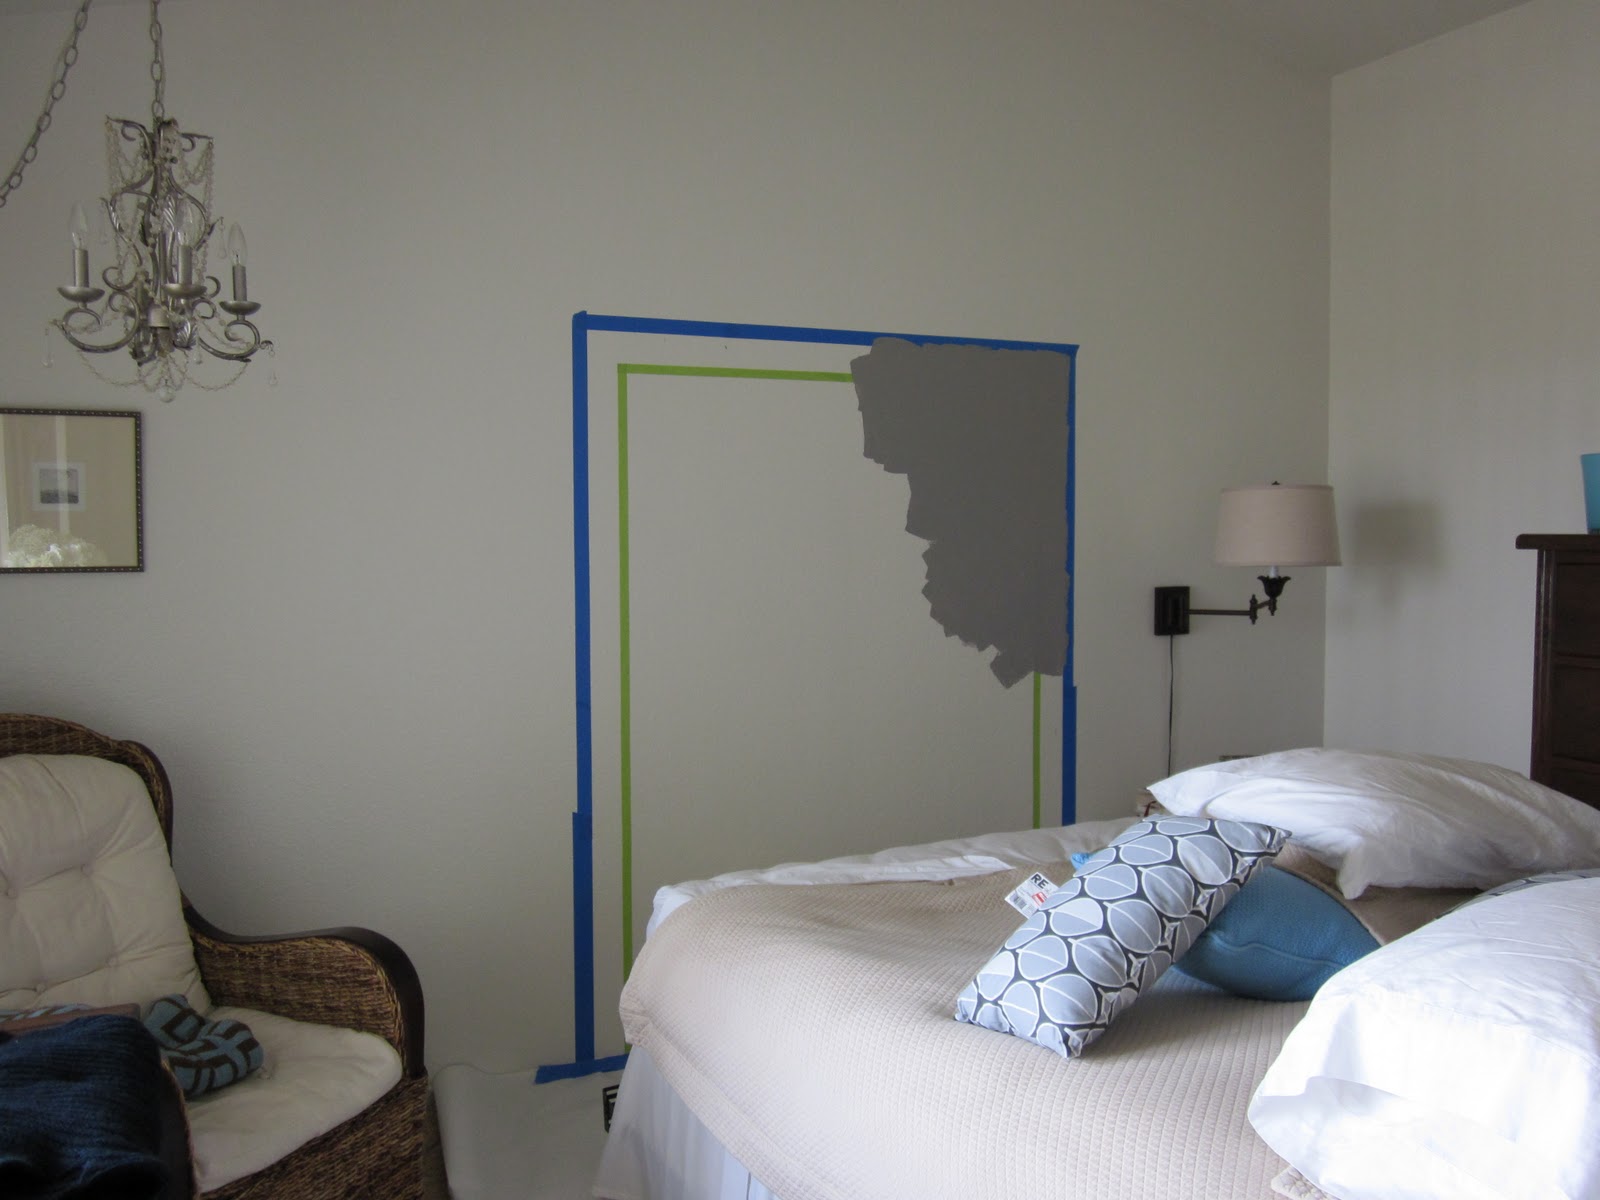 The Wall Painted Headboard, How To Protect Wall From Headboard